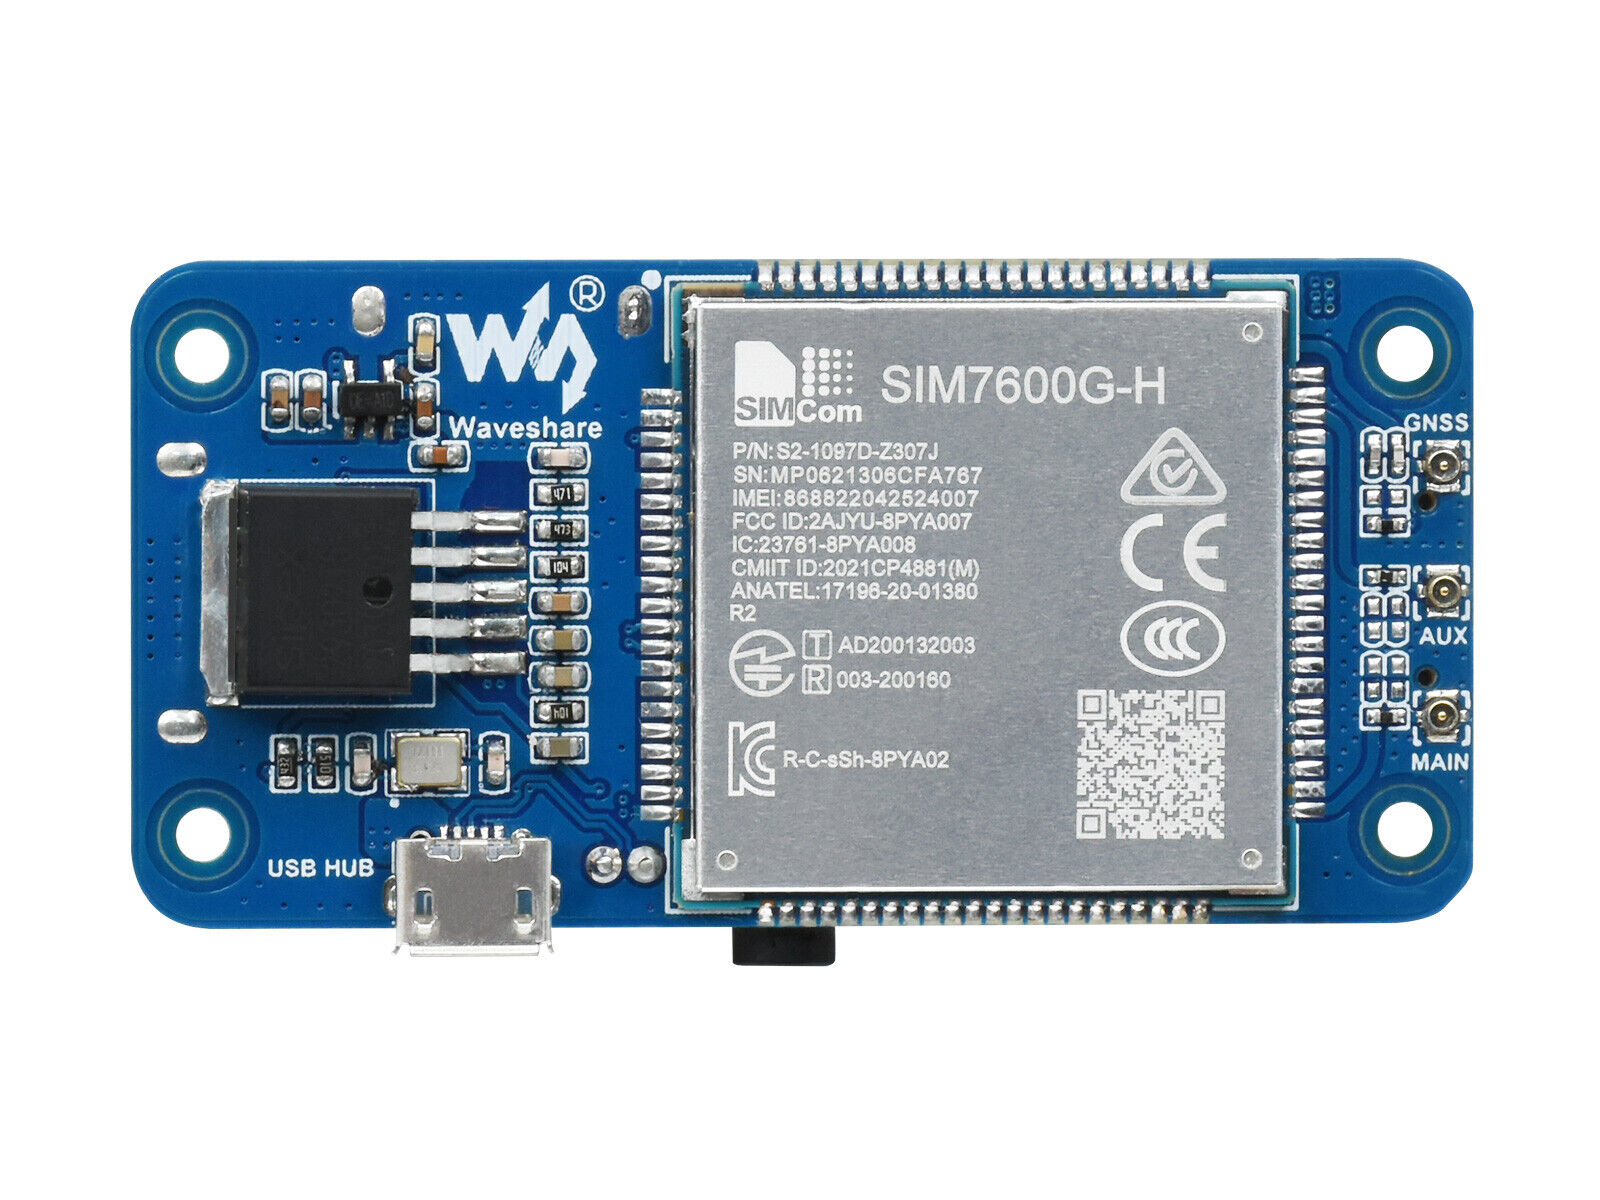 SIM7600G-H 4G HAT (B) for Raspberry Pi Supports LTE Cat-4 4G 3G 2G Global Band